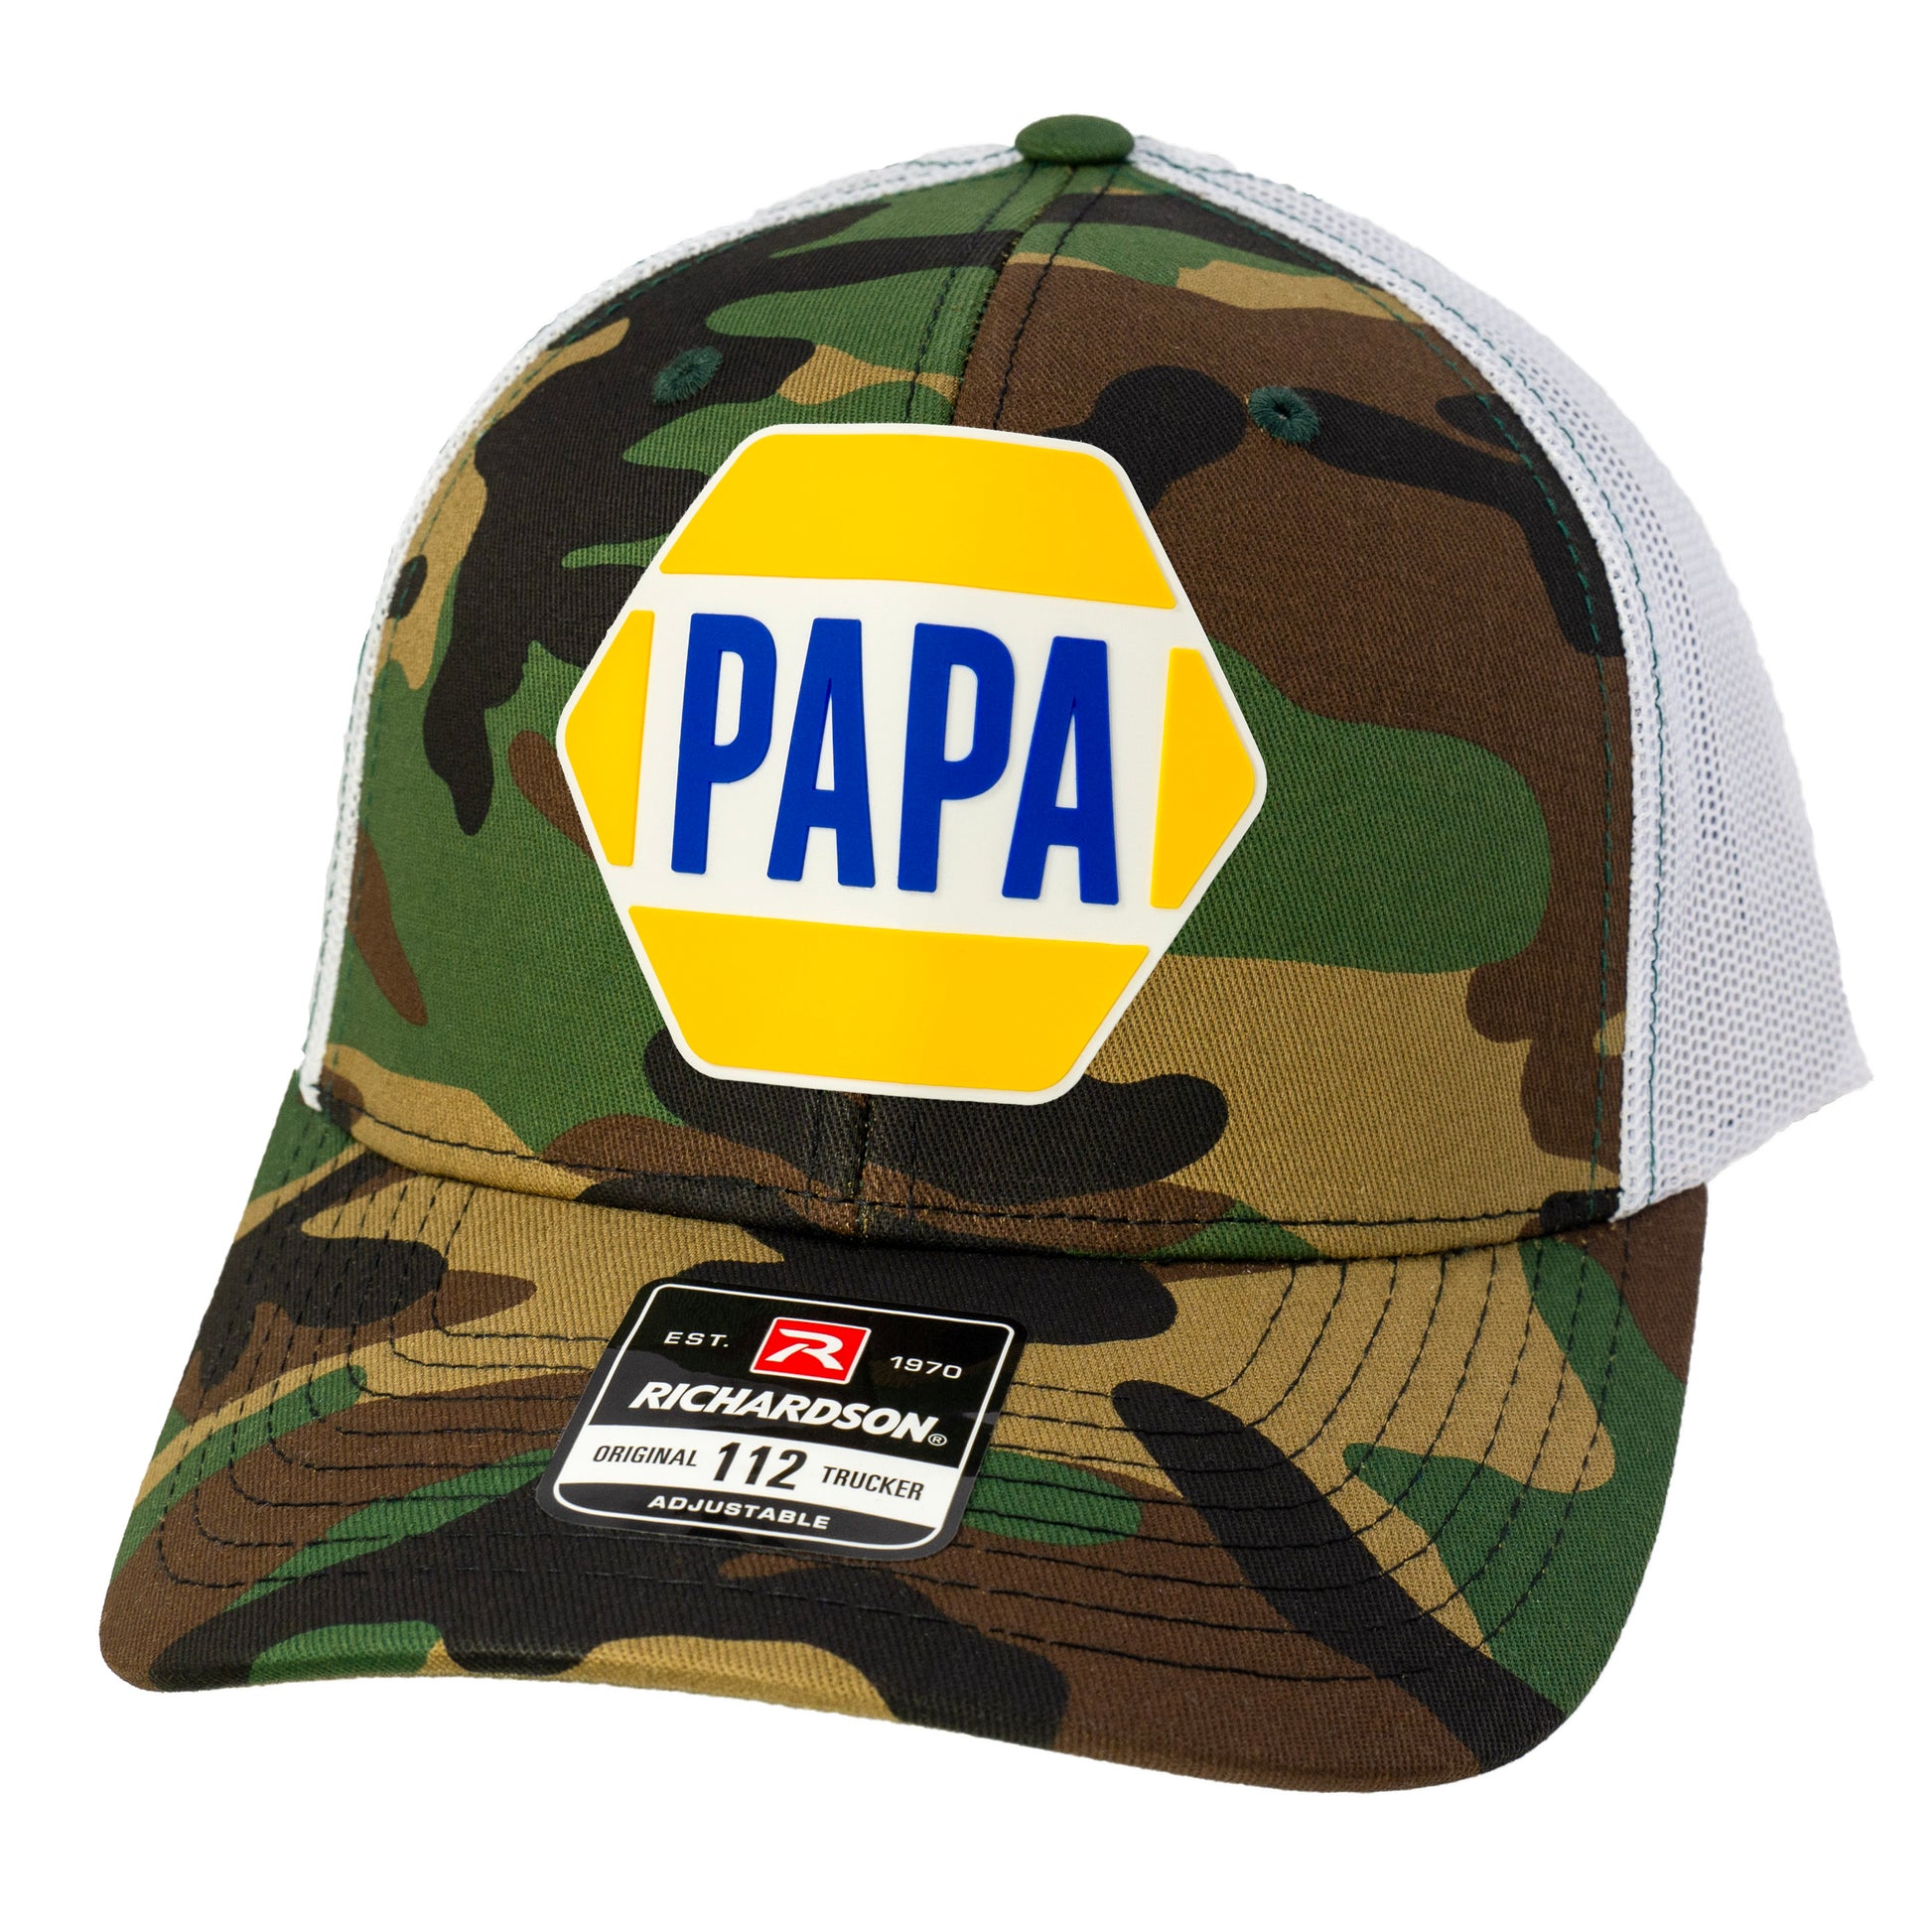 PAPA Know How 3D Patterned Snapback Trucker Hat- Army Camo/ White - Ten Gallon Hat Co.